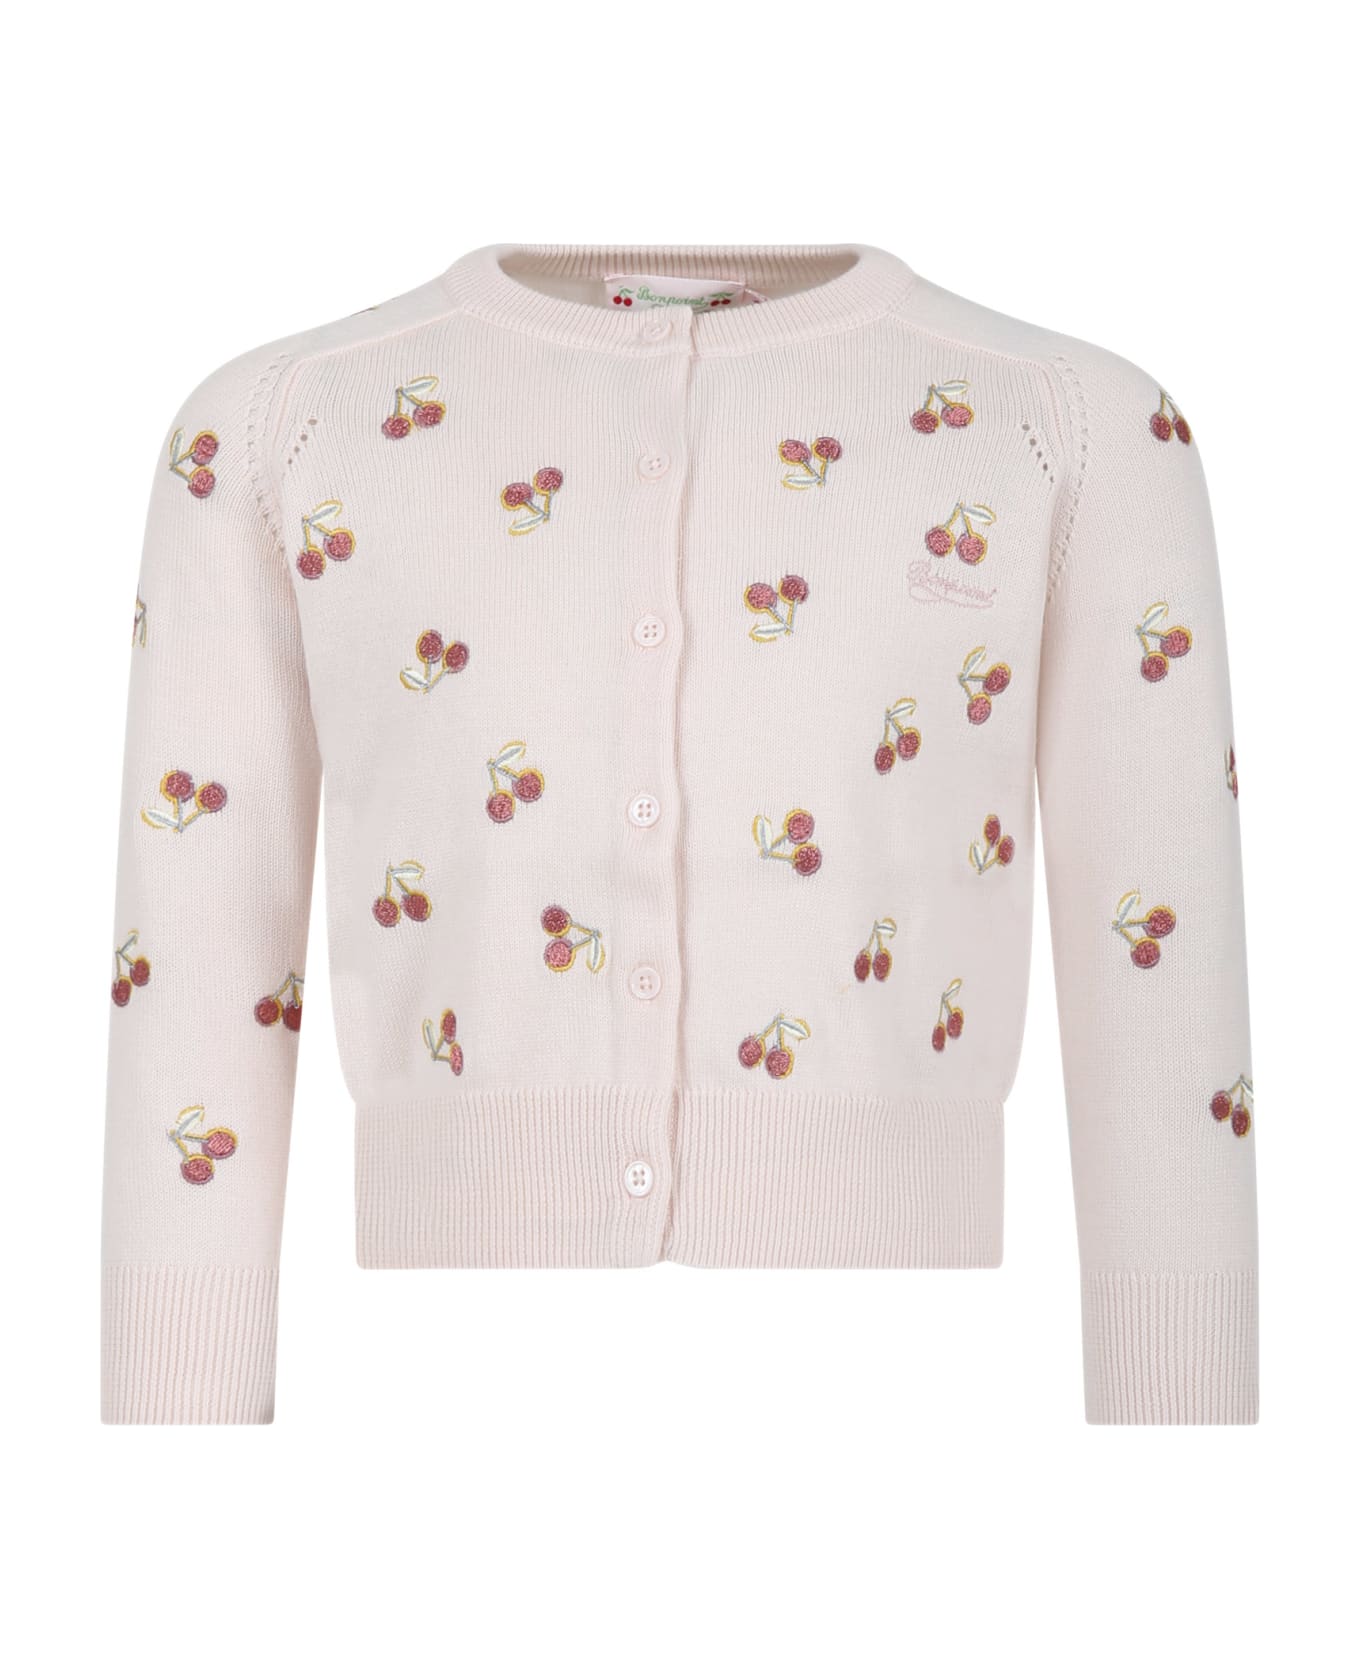 Bonpoint Pink Cardigan For Girl With Cherries - Pink